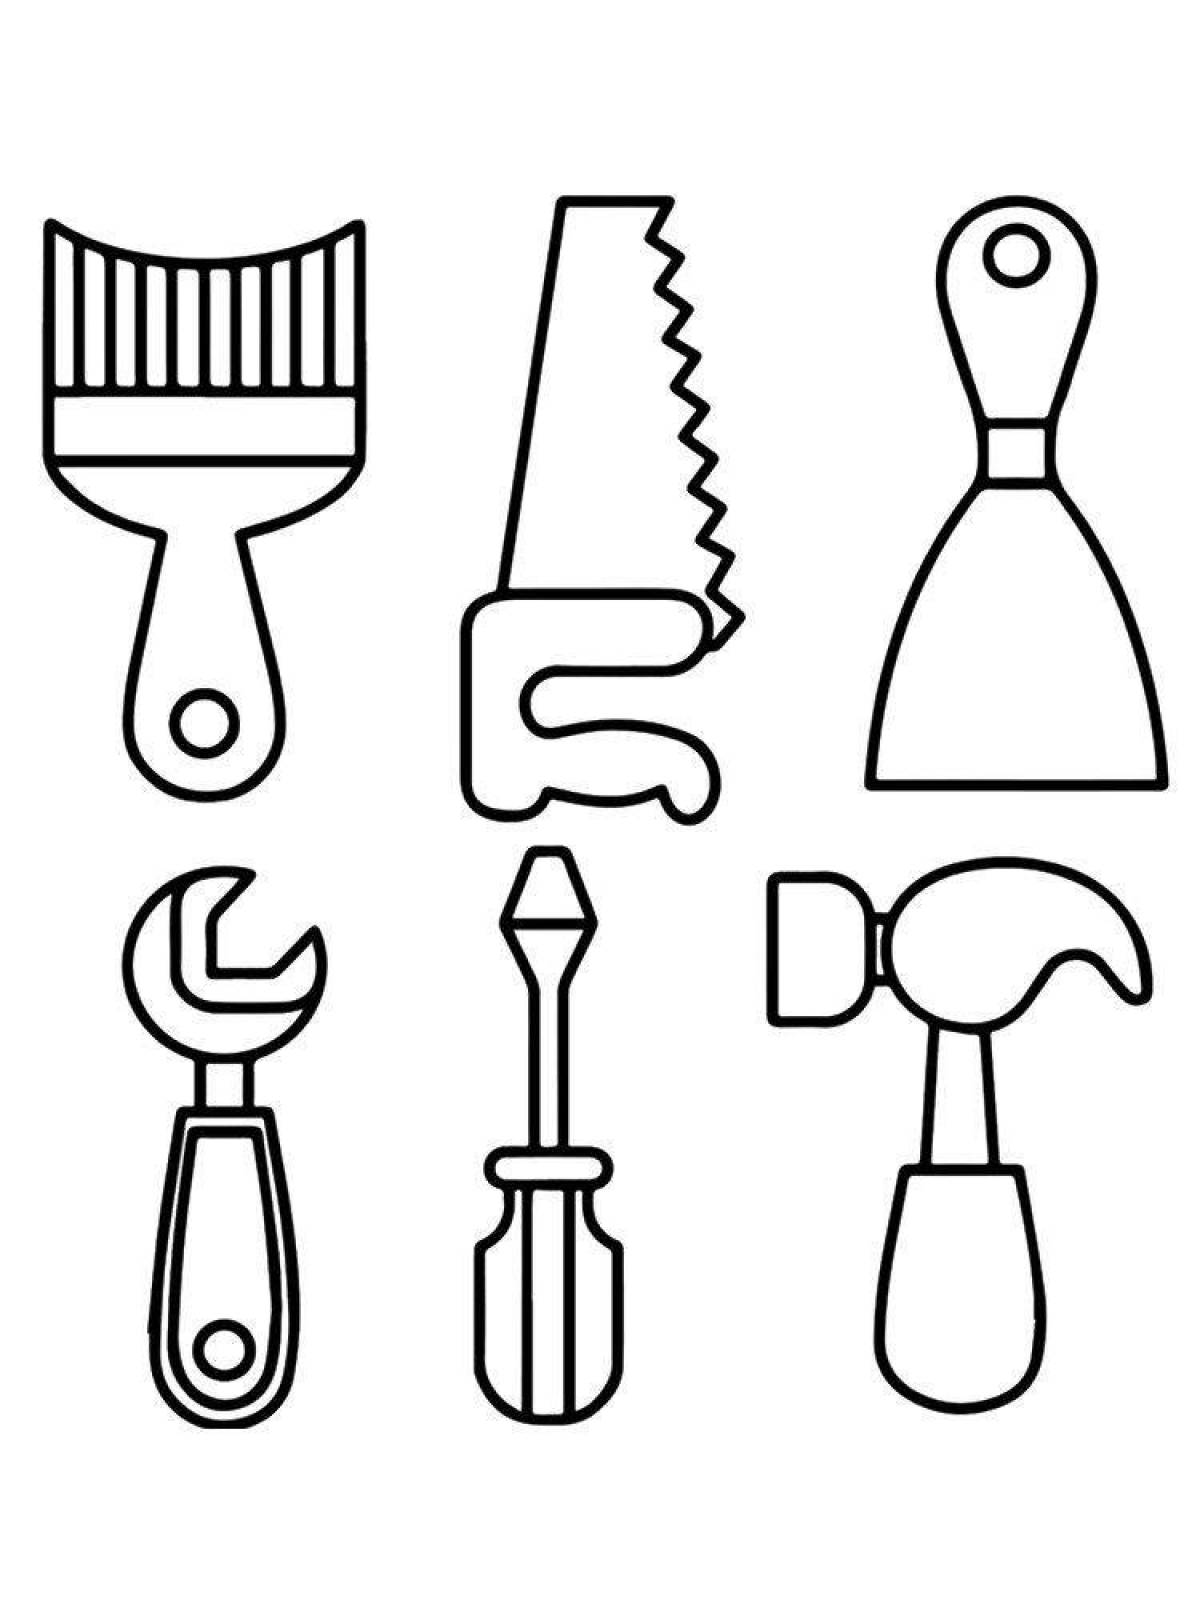 Coloring page with funny building tools